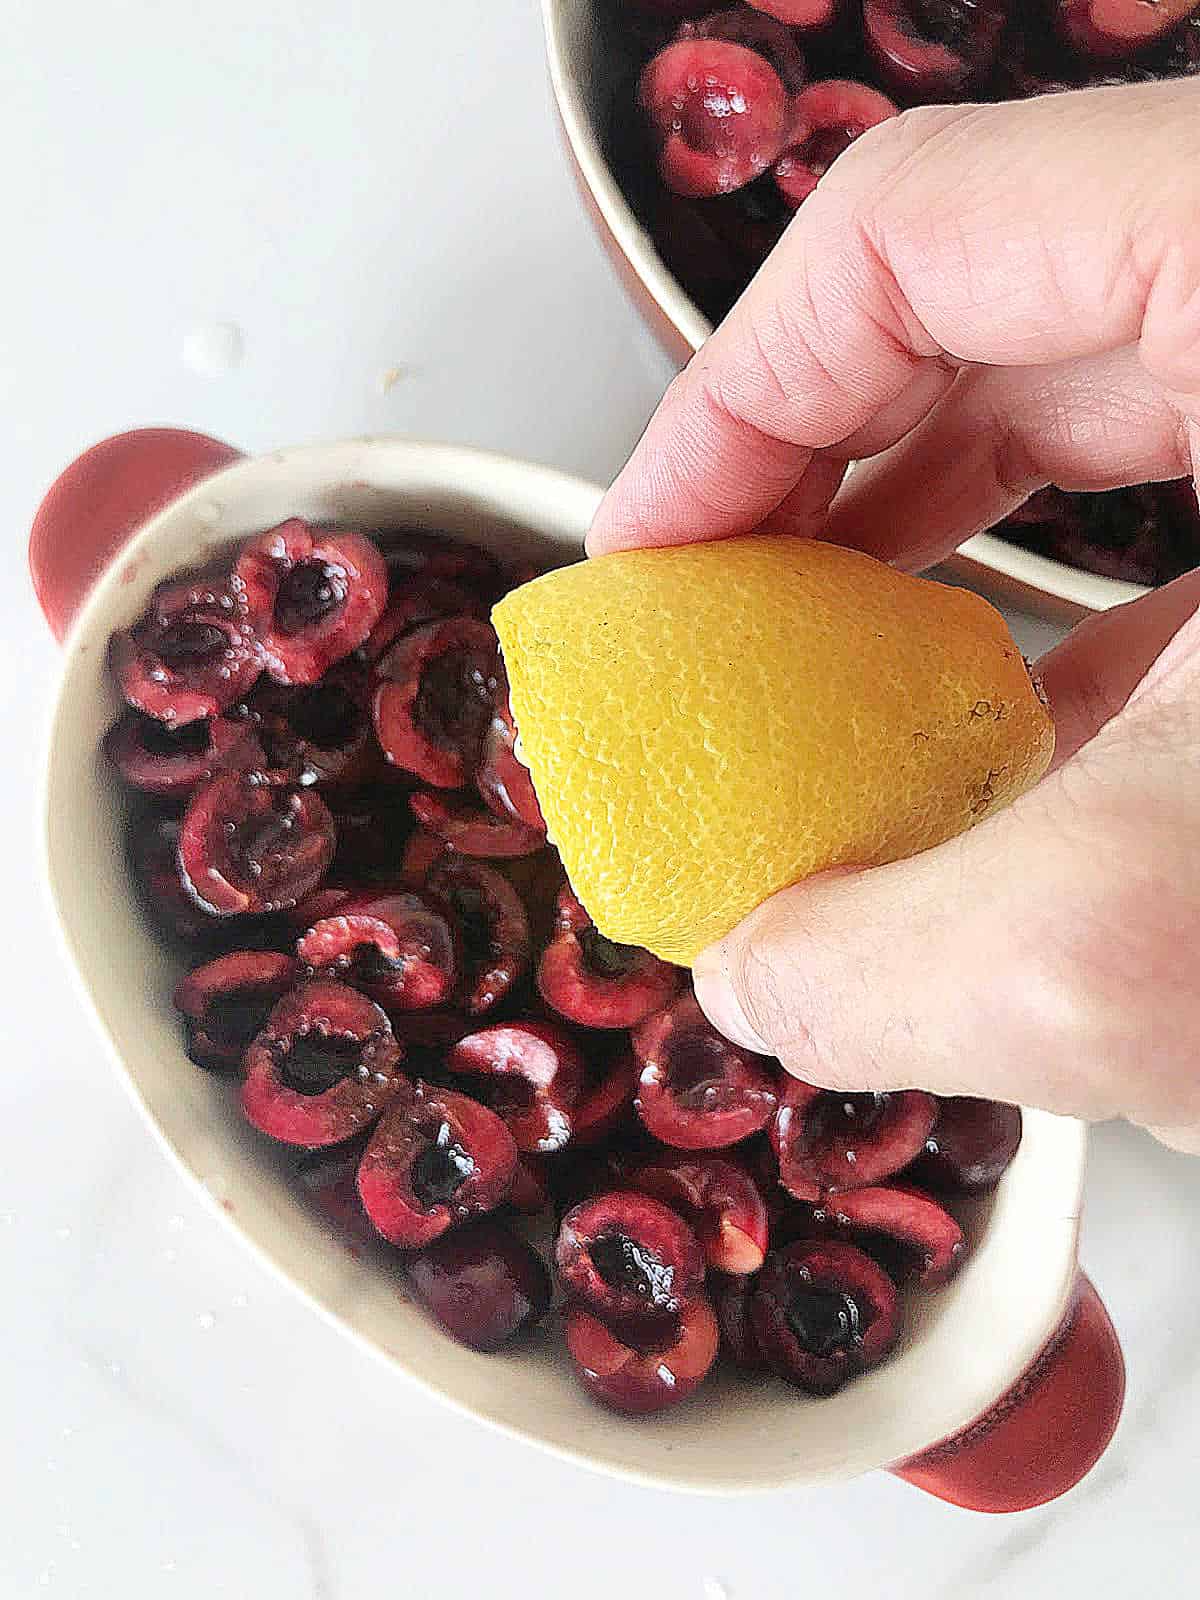 Hand adding lemon juice to fresh cherries in oval dish on white surface.